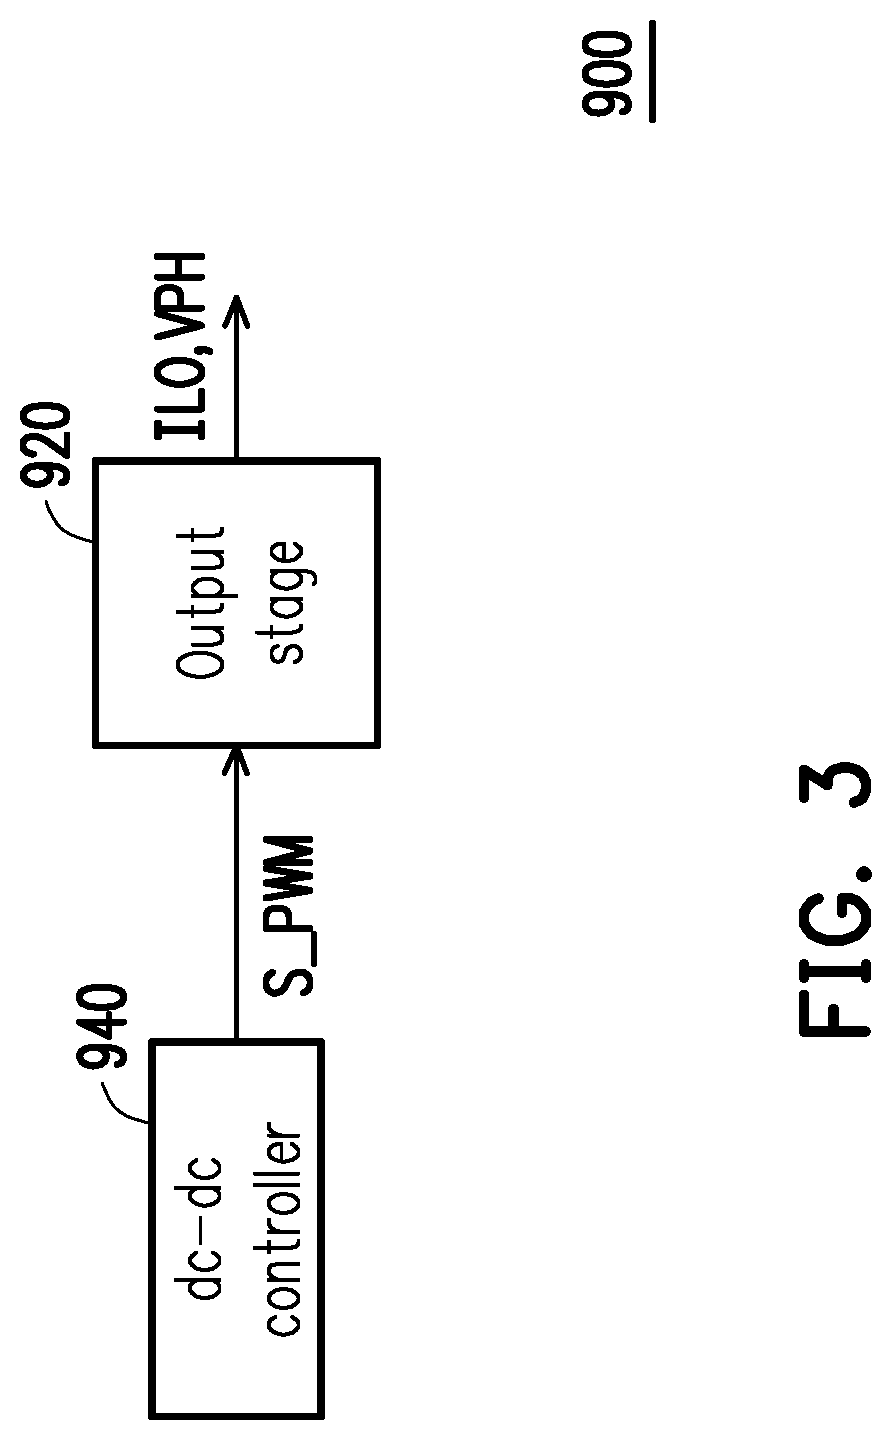 DC-DC controller with DCM control